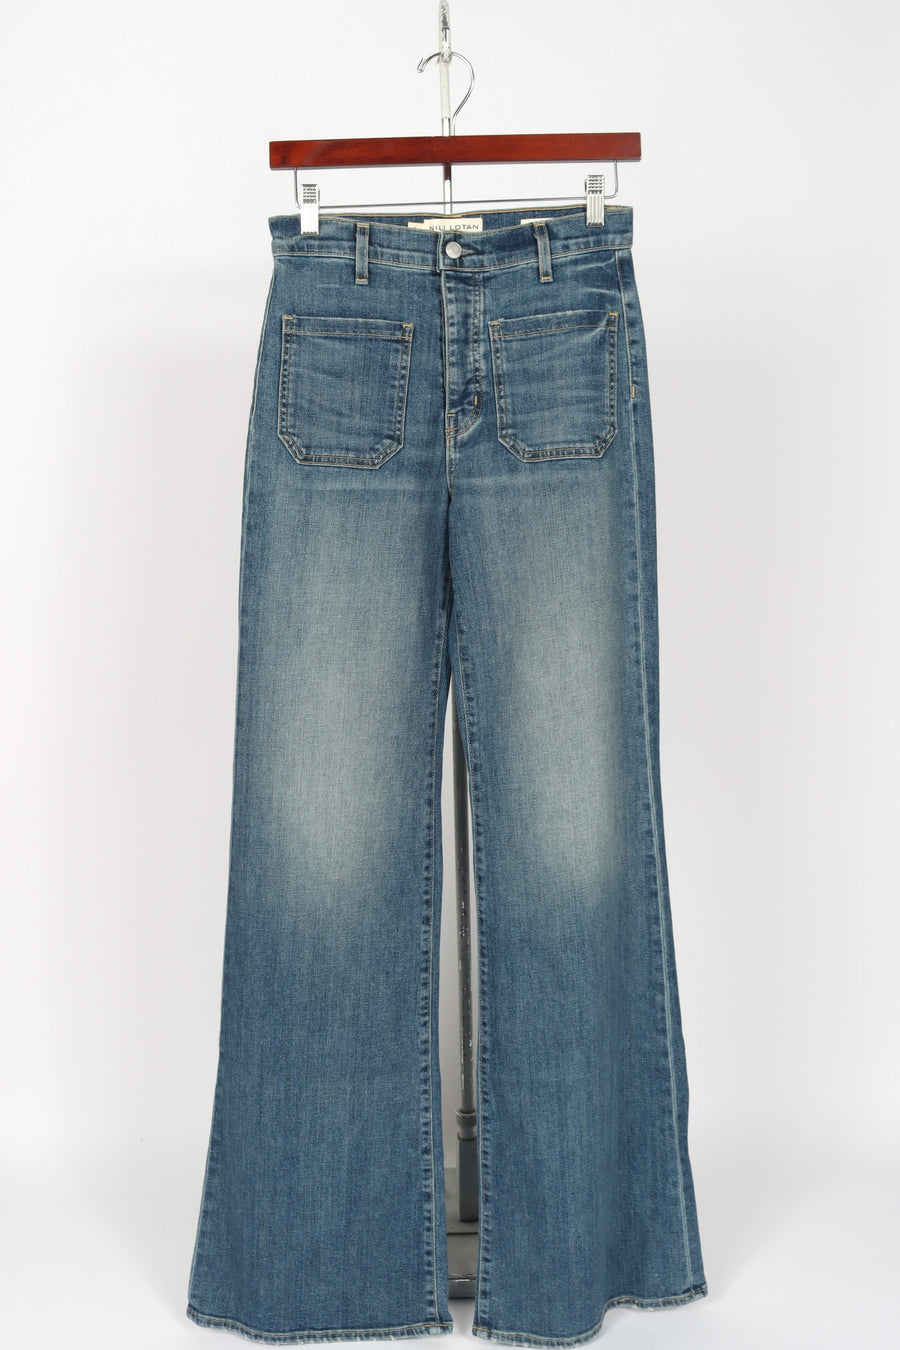 Florence Jean - Classic Wash